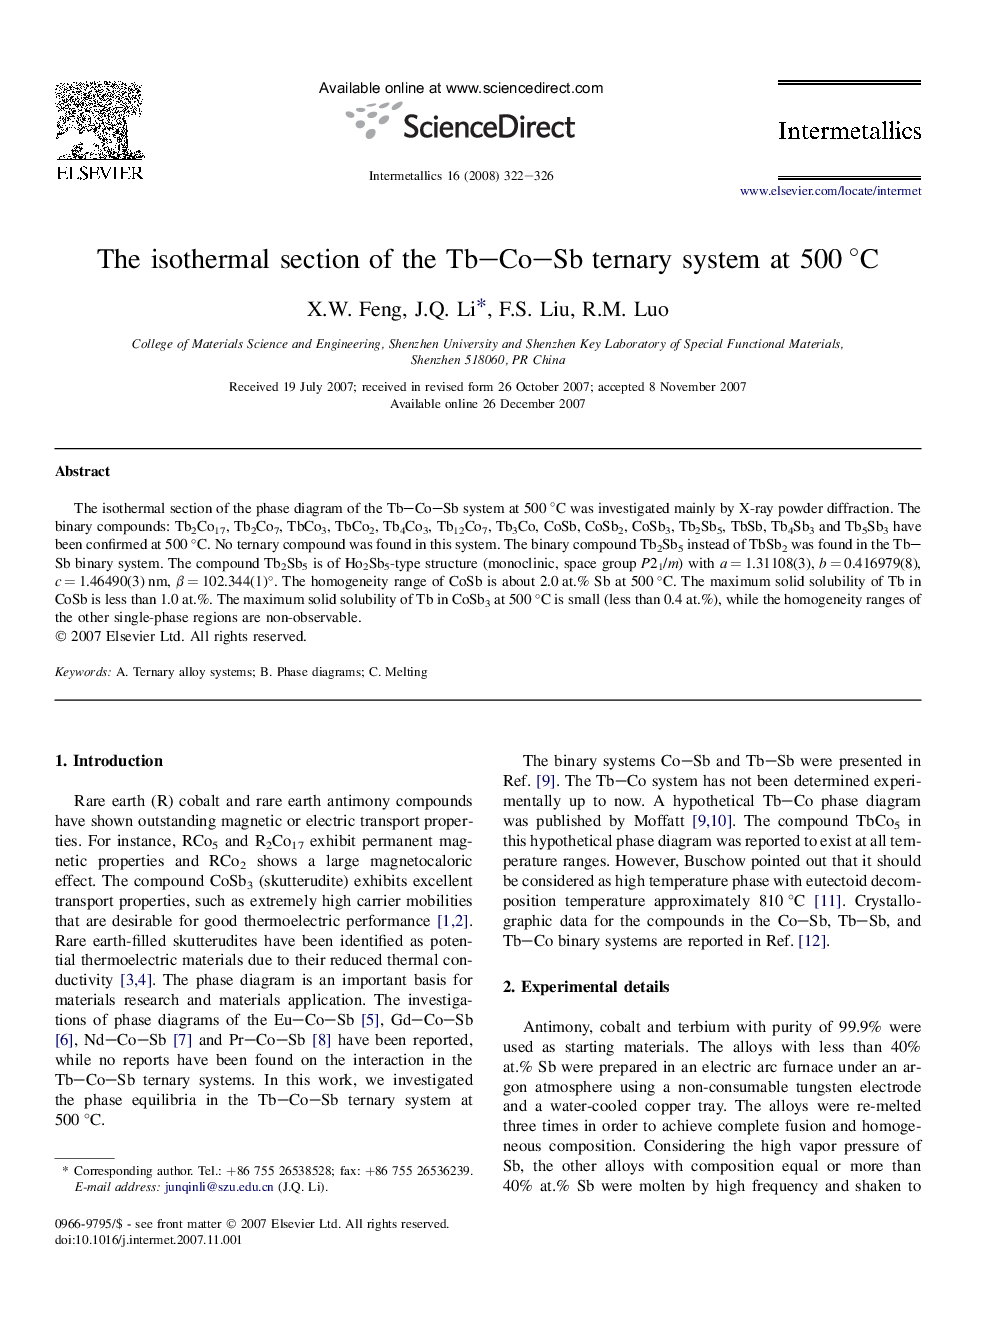 The isothermal section of the Tb–Co–Sb ternary system at 500 °C